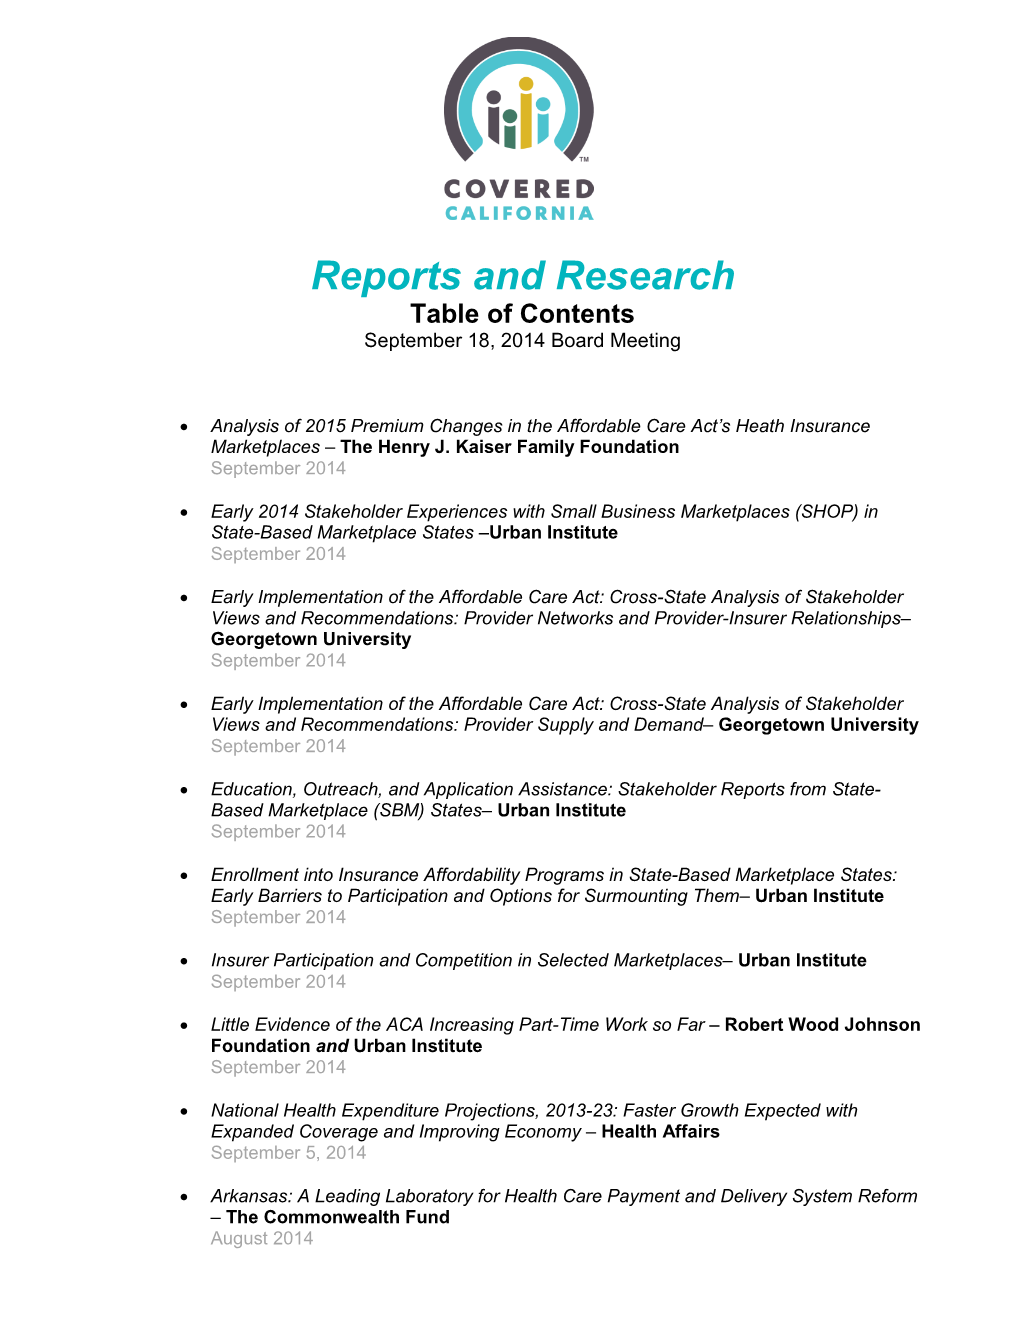 Reports and Research Table of Contents September 18, 2014 Board Meeting